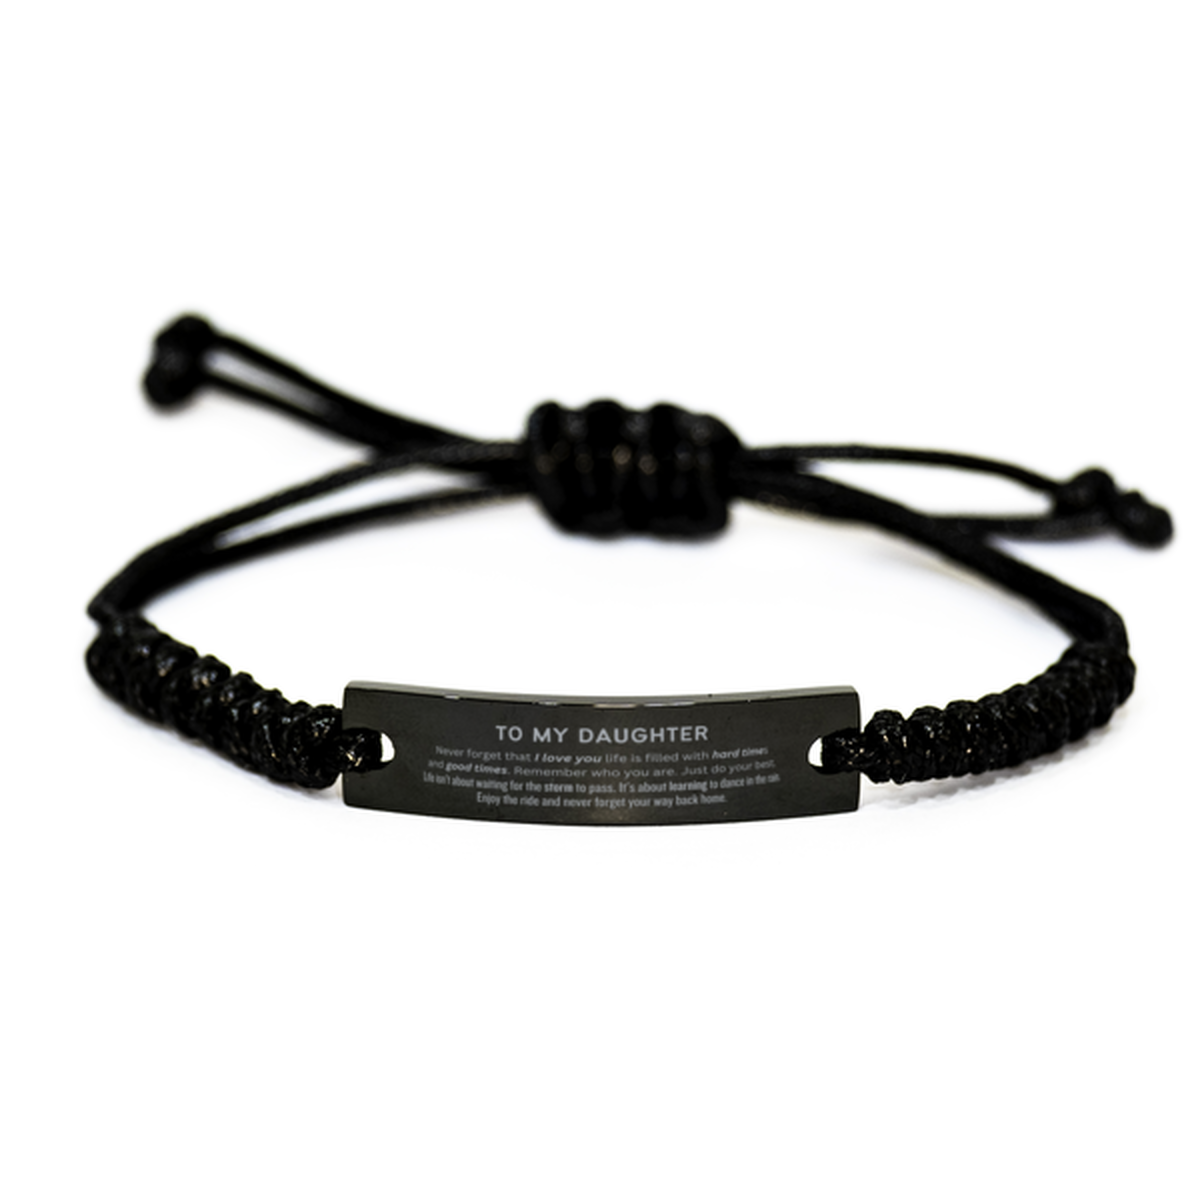 Christmas Daughter Black Rope Bracelet Gifts, To My Daughter Birthday Thank You Gifts For Daughter, Graduation Unique Gifts For Daughter To My Daughter Never forget that I love you life is filled with hard times and good times. Remember who you are. Just